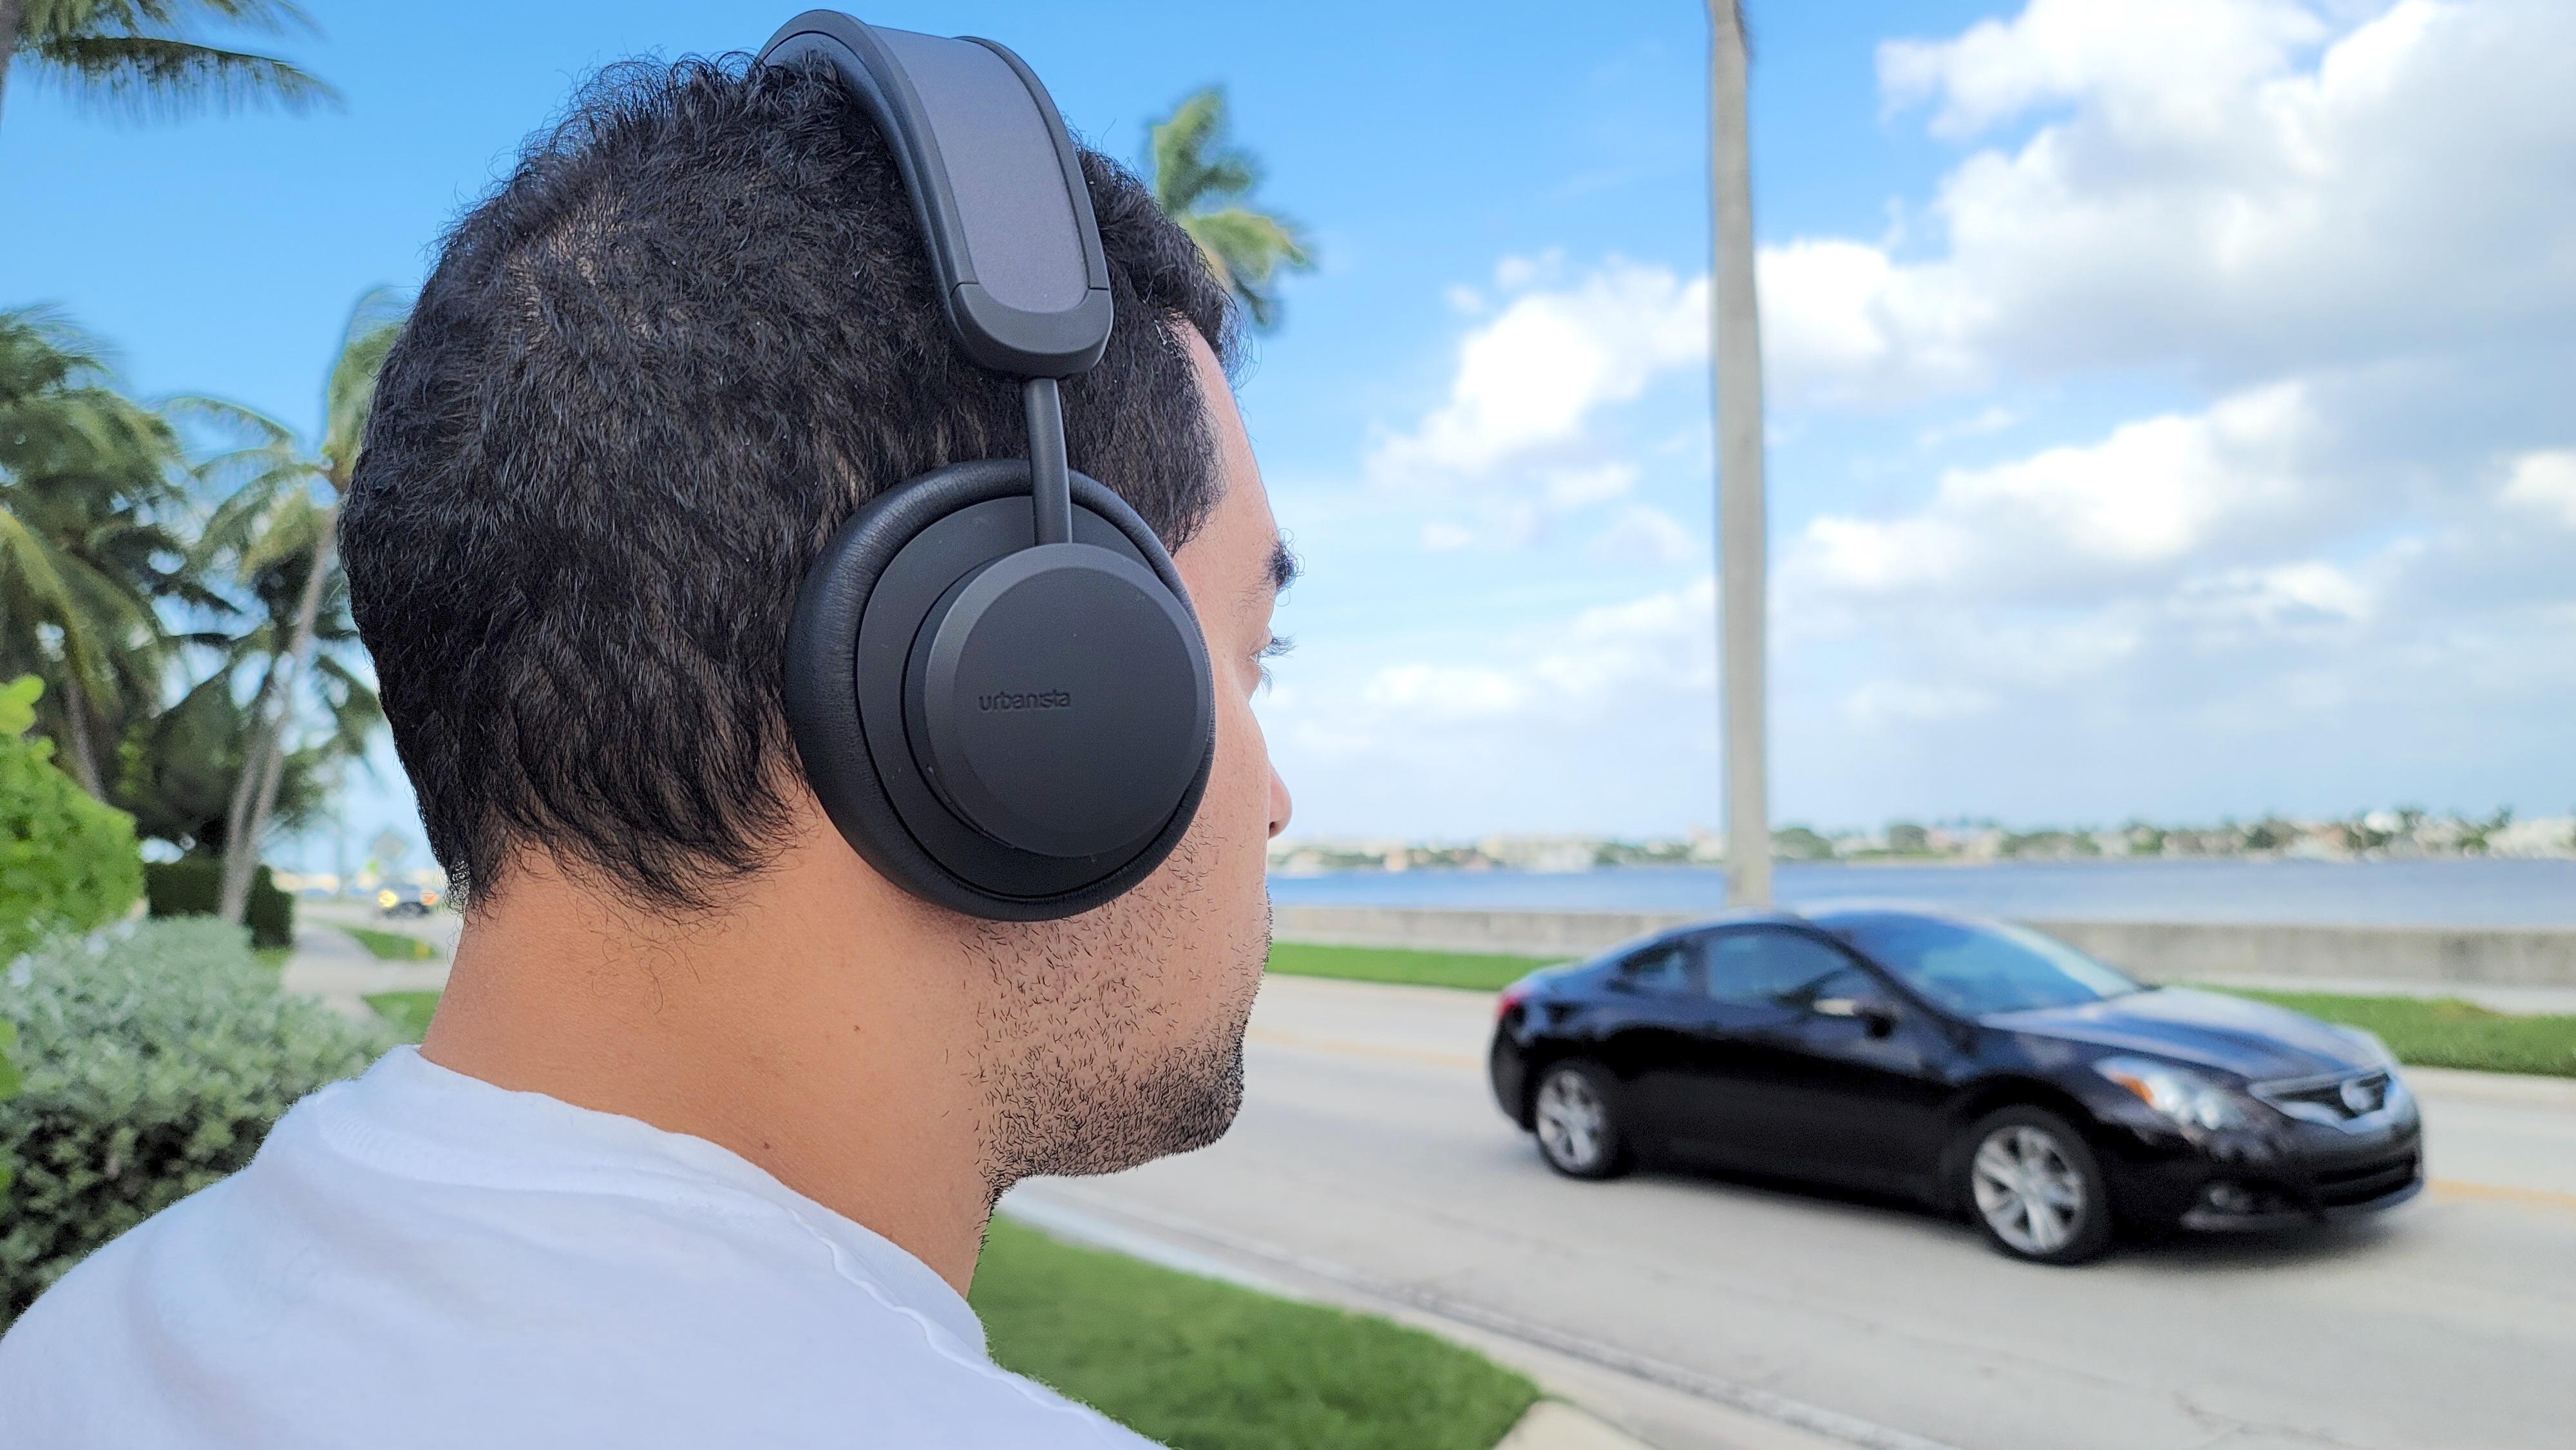 Noise cancelling being tested on the Urbanista Los Angeles